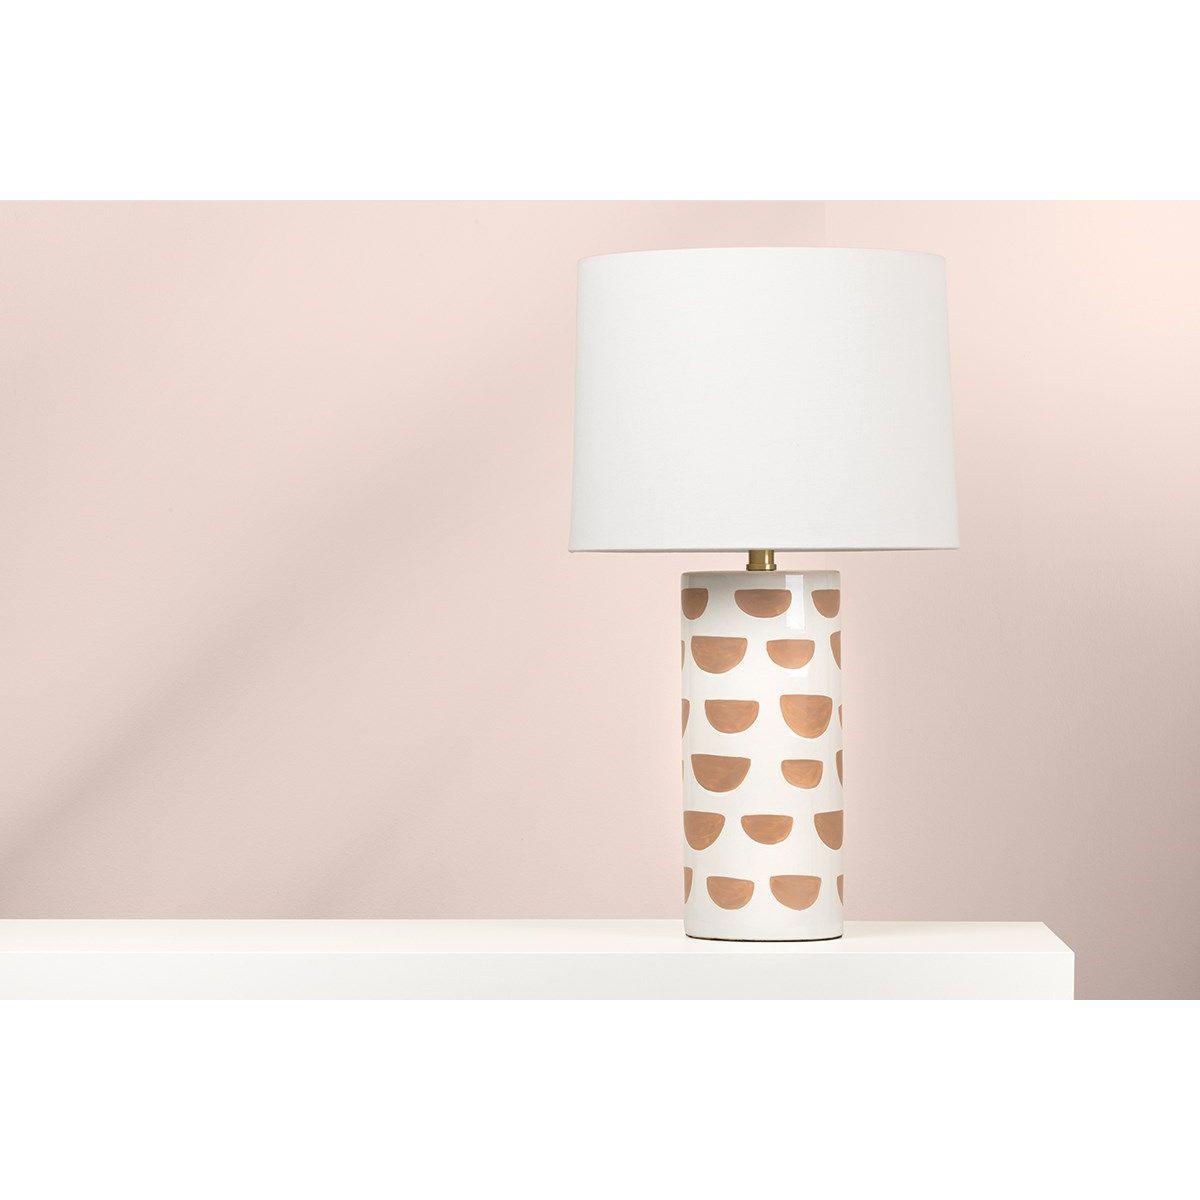 Minnie Tall Table Lamp Ceramic White Geometric Pattern with Aged Brass Accents